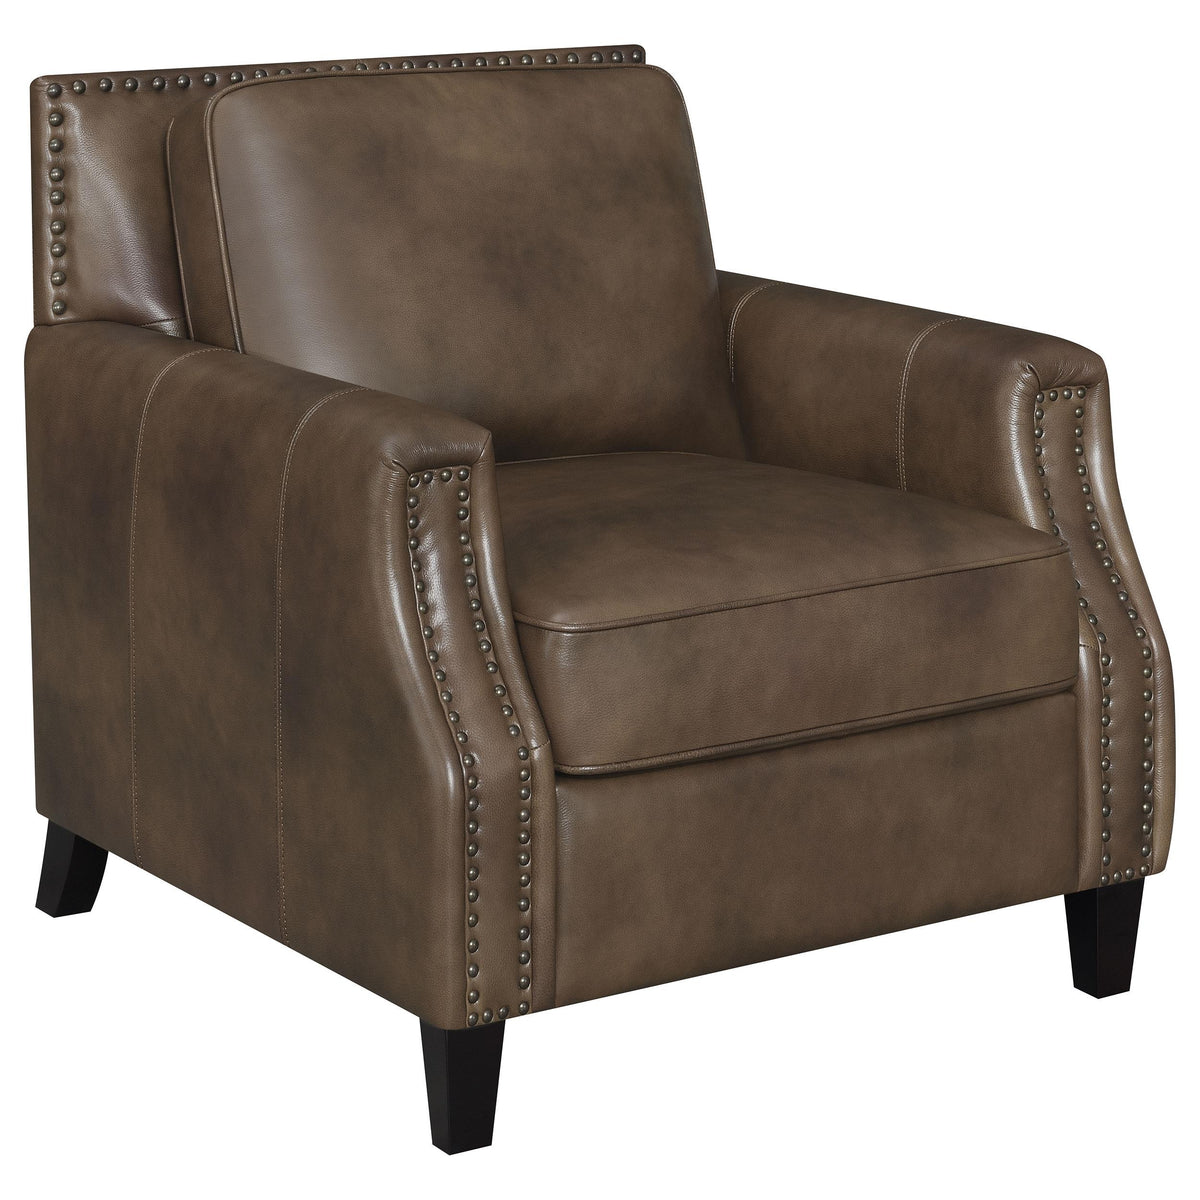 Leaton Upholstered Recessed Arm Chair Brown Sugar Leaton Upholstered Recessed Arm Chair Brown Sugar Half Price Furniture